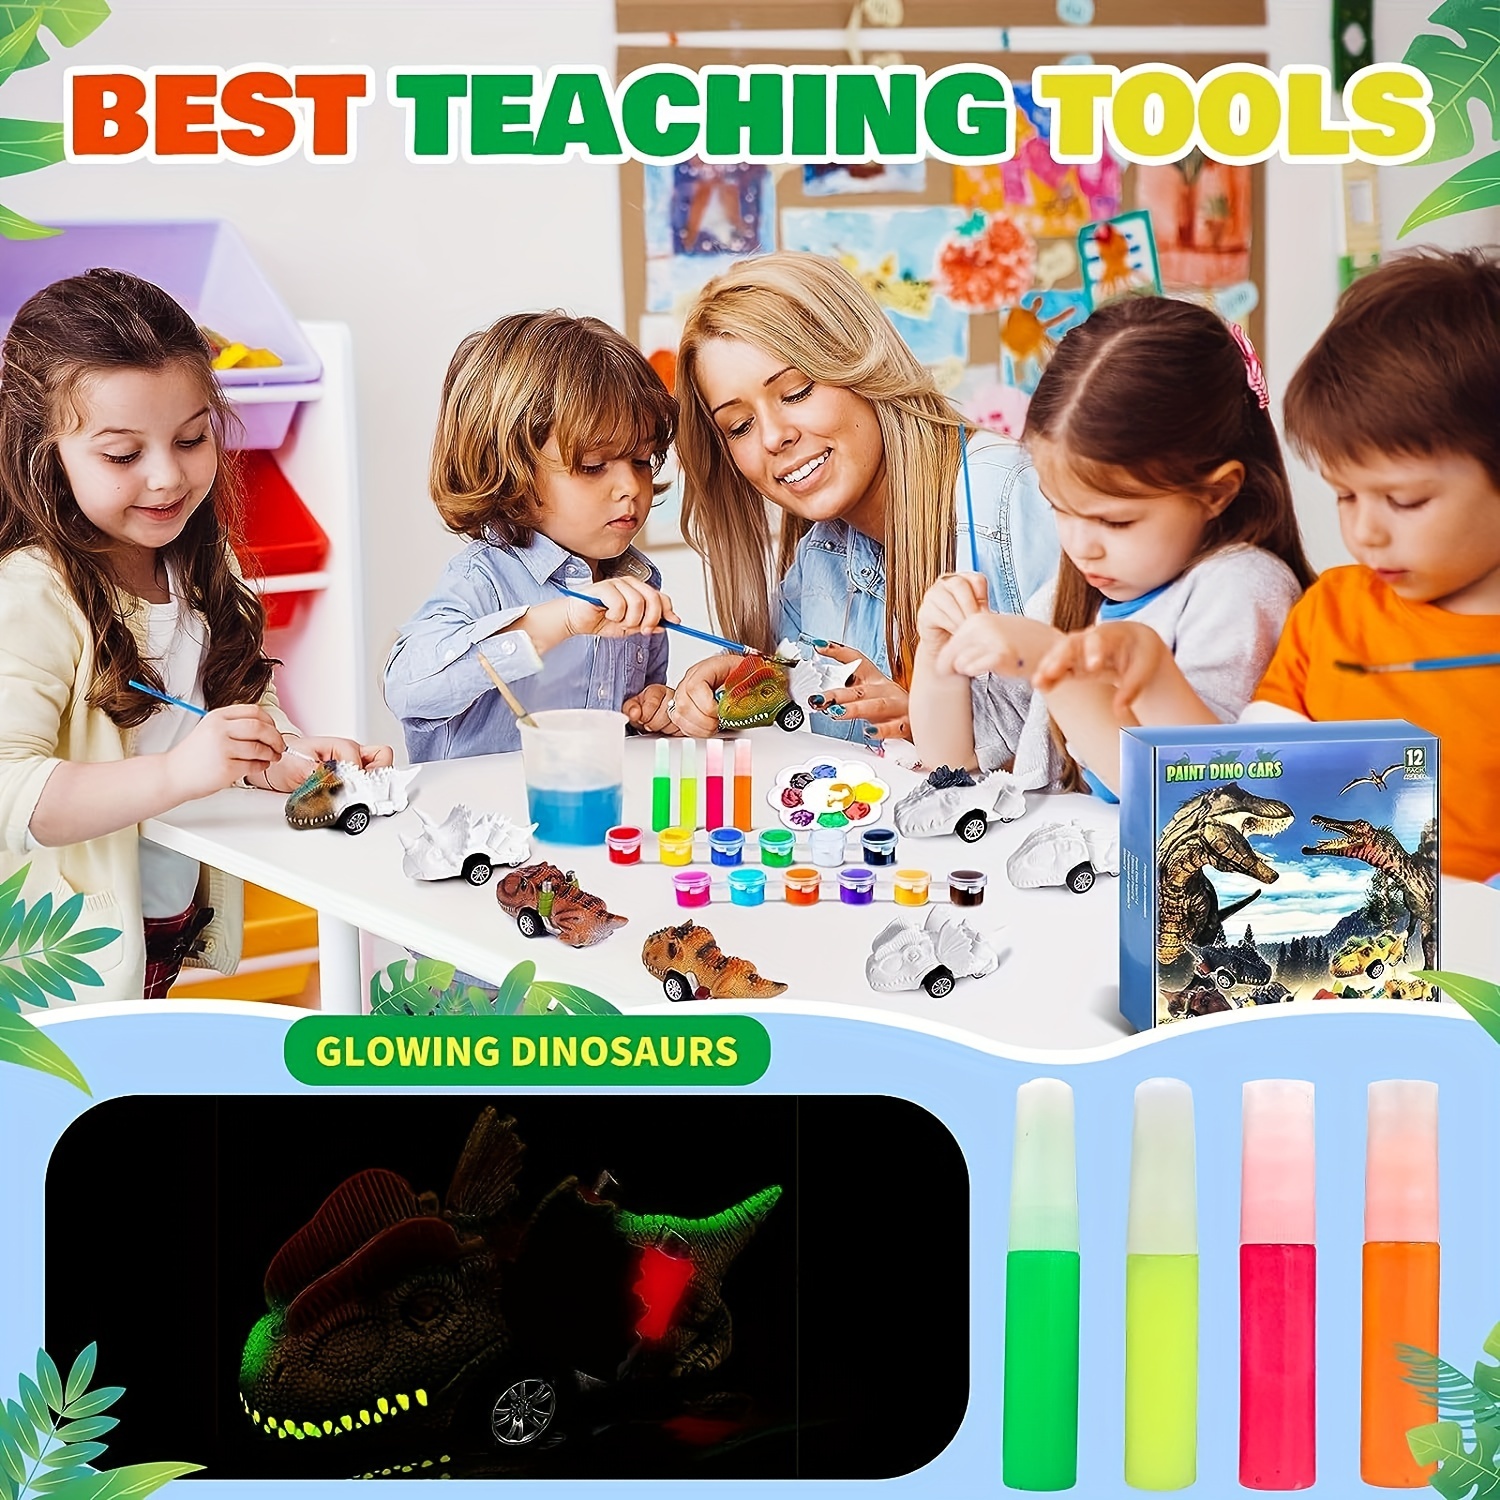  Dinosaur Painting Kit for Kids Ages 4-8 with 2 Dinos - Paint  Your Own Wooden Dino Model Kit for Boys 8-12 - Dinosaur Arts & Crafts Gift  for Boys - Creative